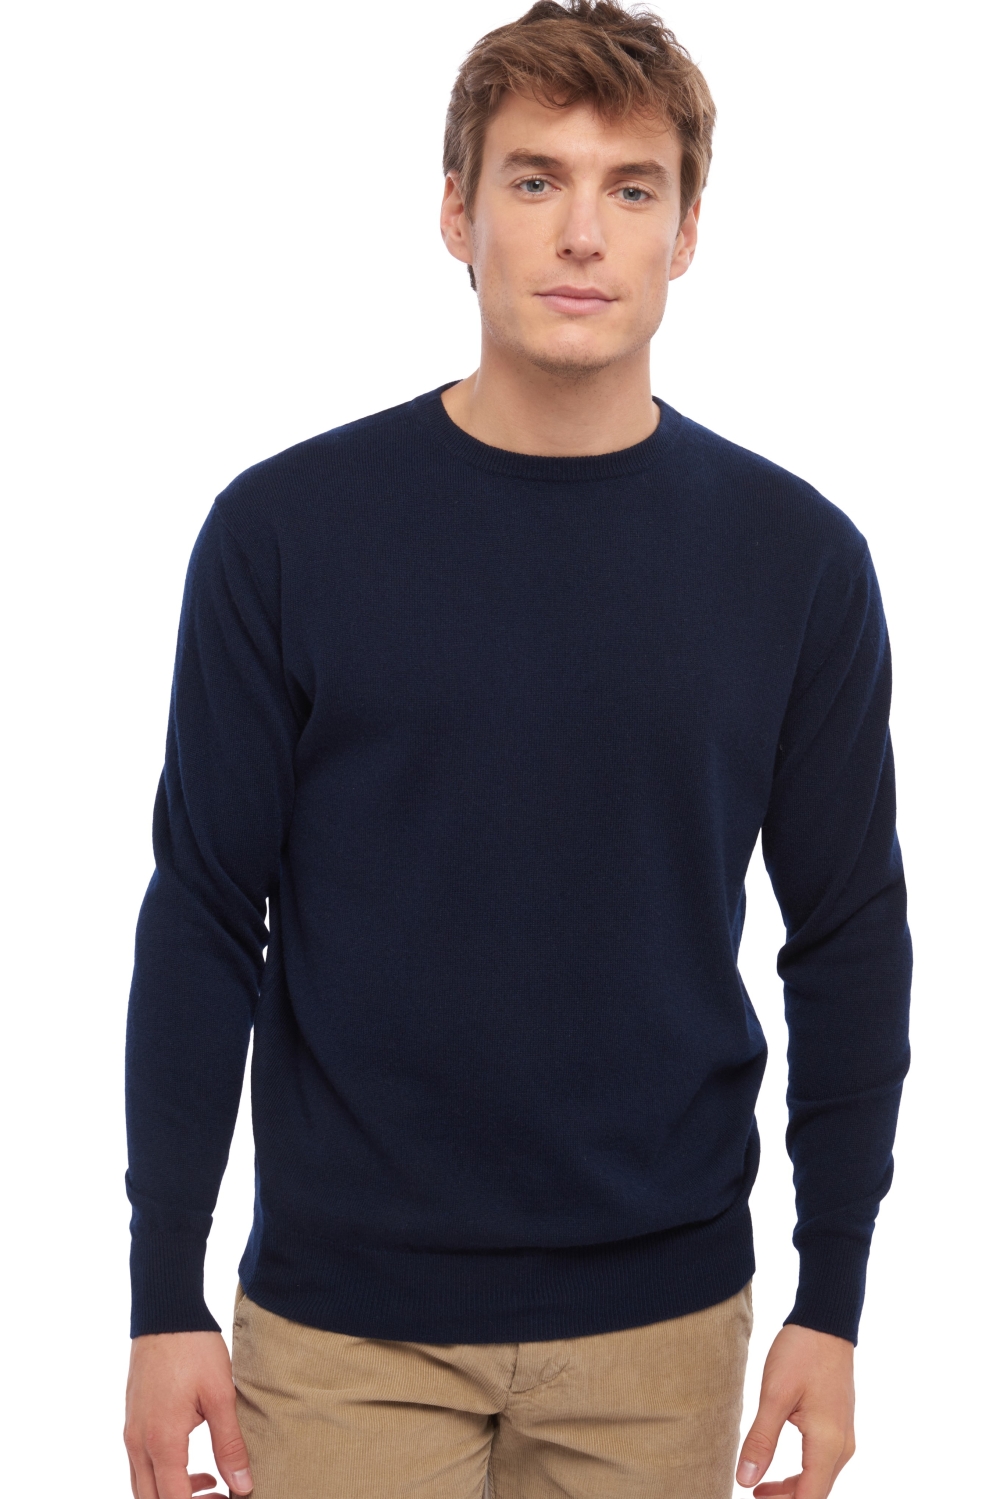 Cachemire pull homme col rond nestor marine fonce xl